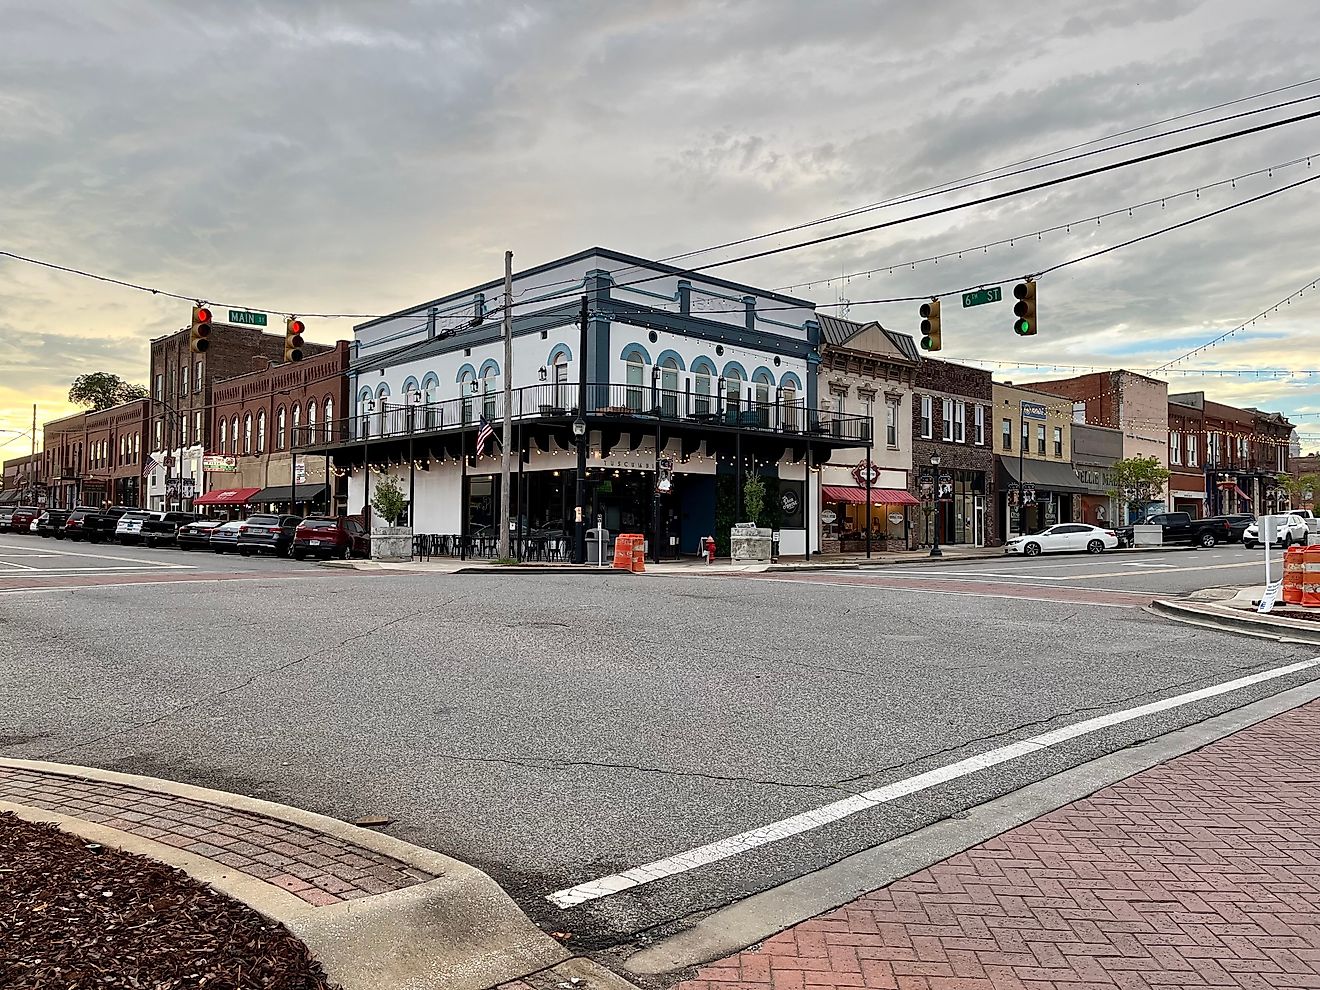 Historic buildings in the downtown area of Tuscumbia, Alabama. Editorial credit: Luisa P Oswalt / Shutterstock.com